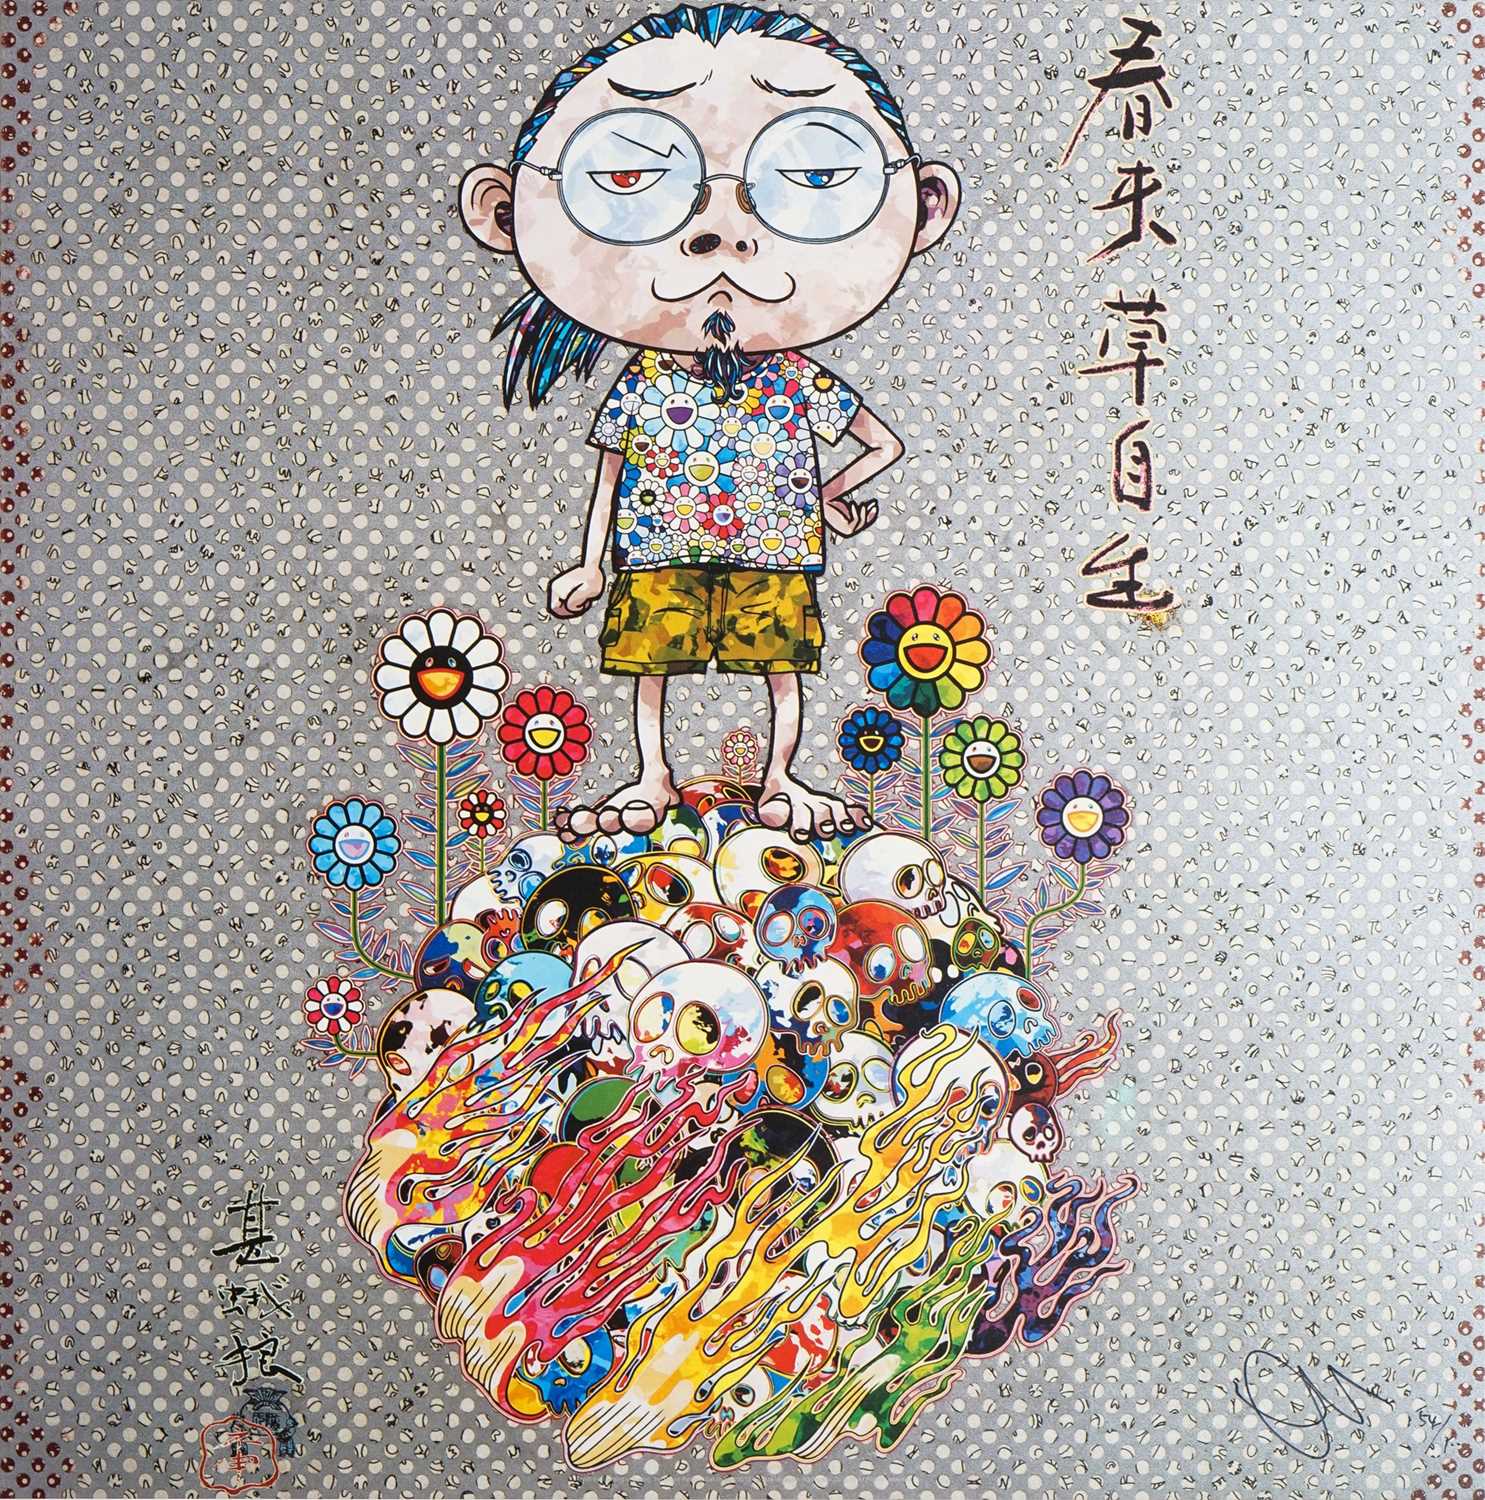 Lot 152 - Takashi Murakami (Japanese 1962-), 'With the Coming of Spring, the Grass Returns Naturally', 2013